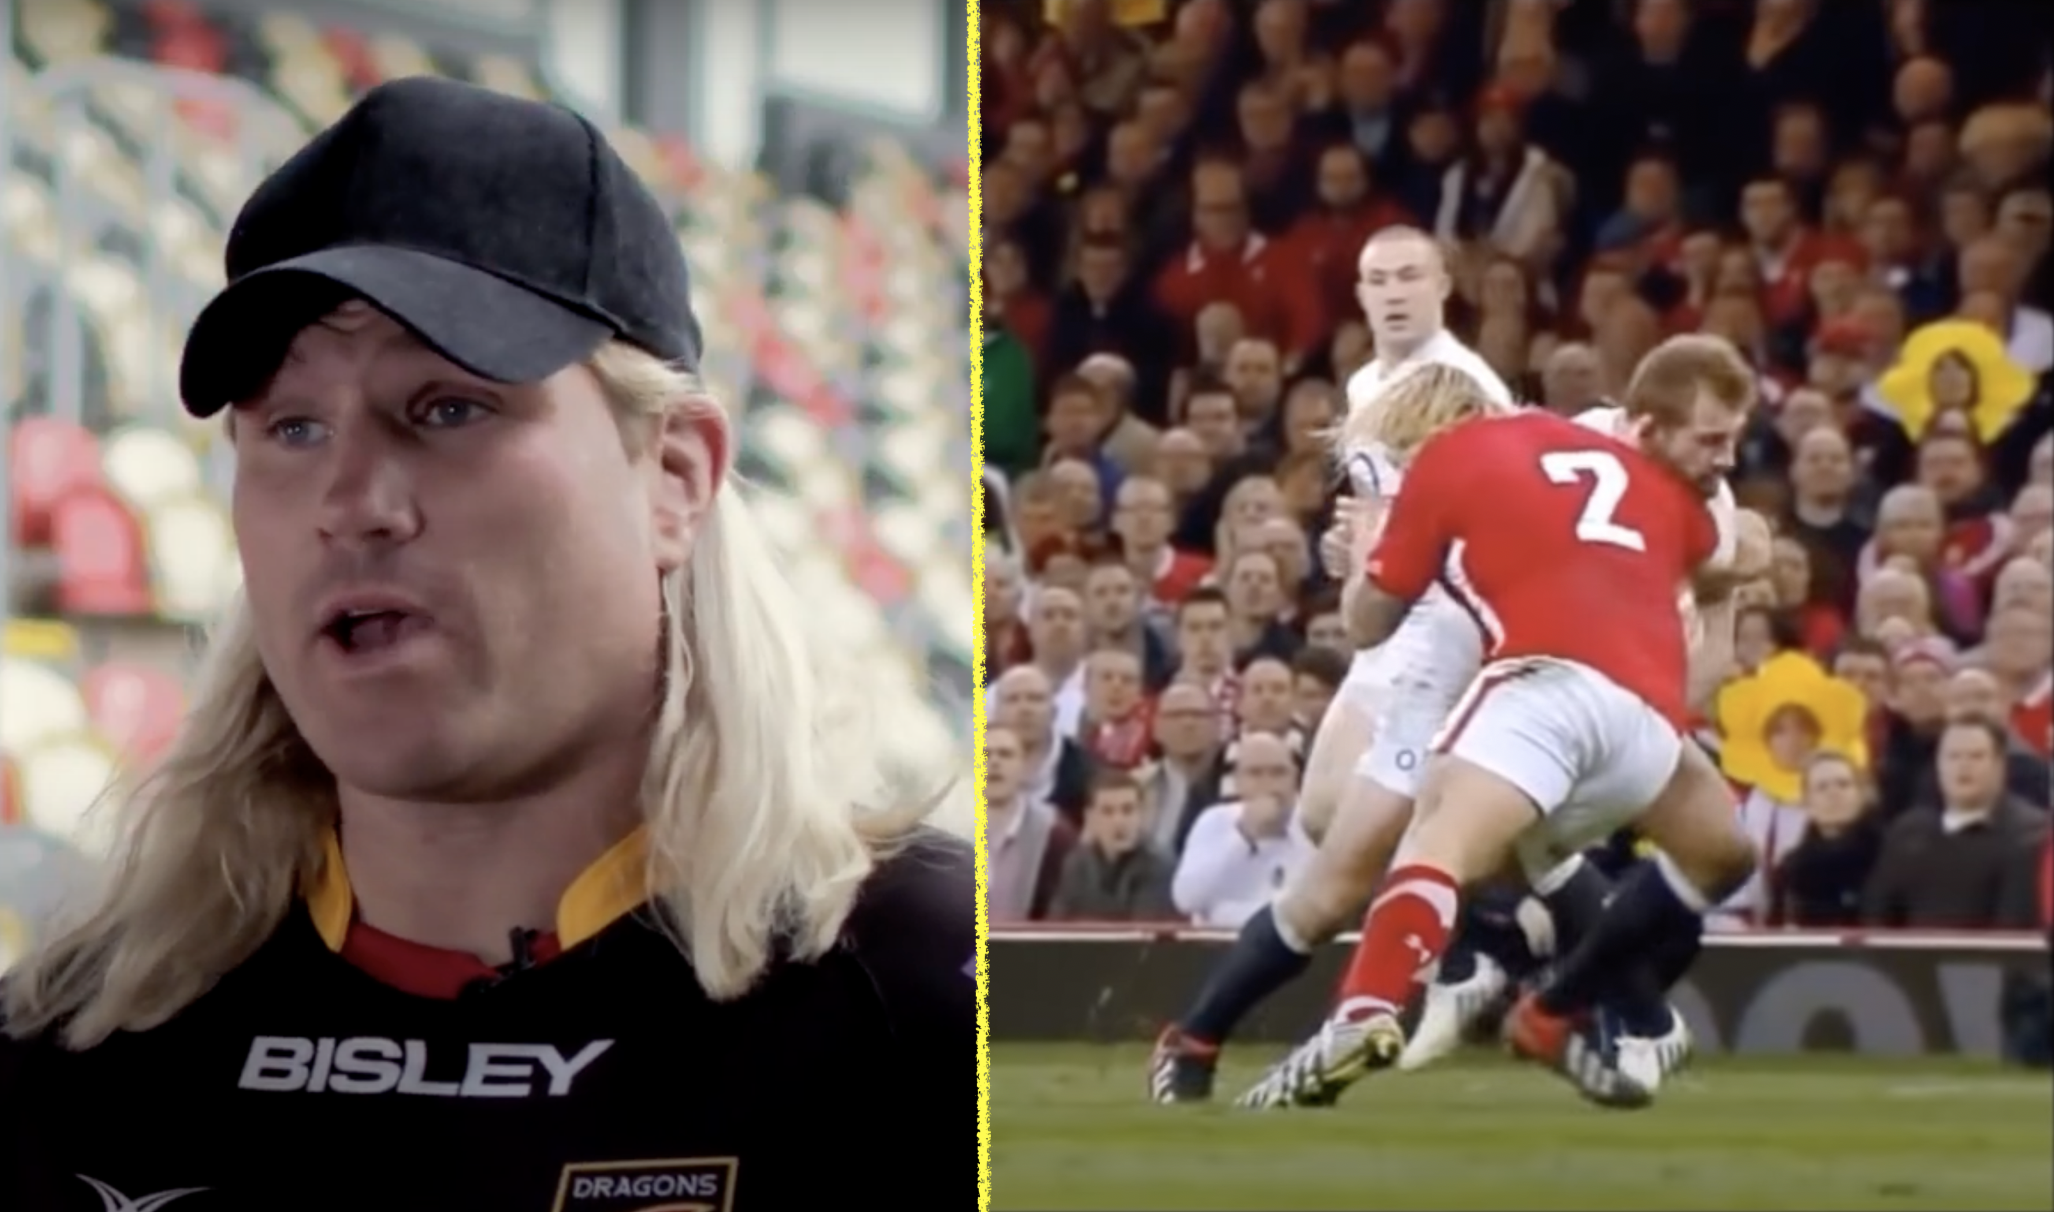 Richard Hibbard shares post retirement x-ray which shows brutal life of pros